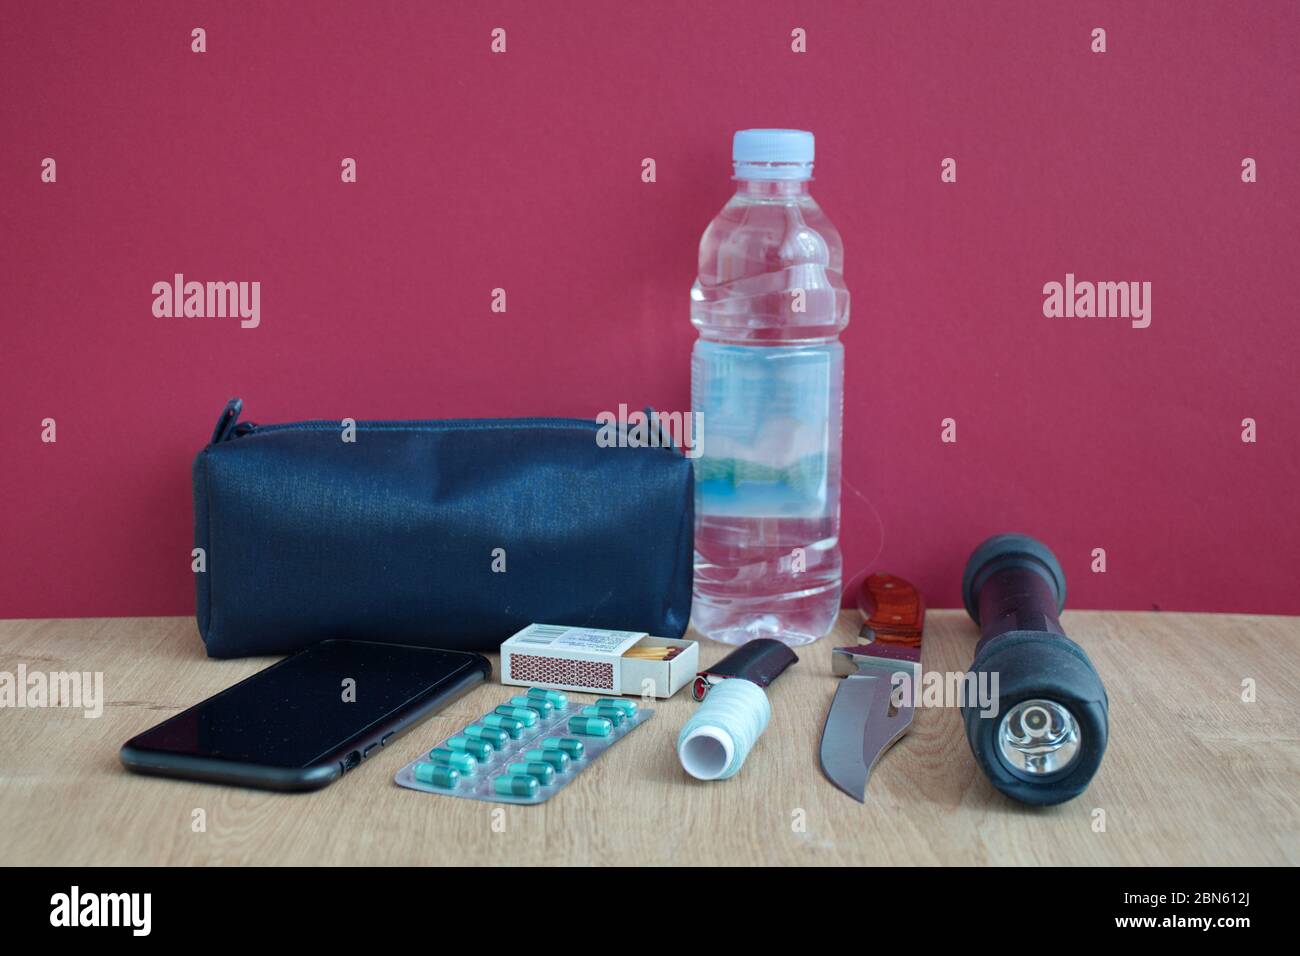 Emergency kit on wooden table against red wall Stock Photo